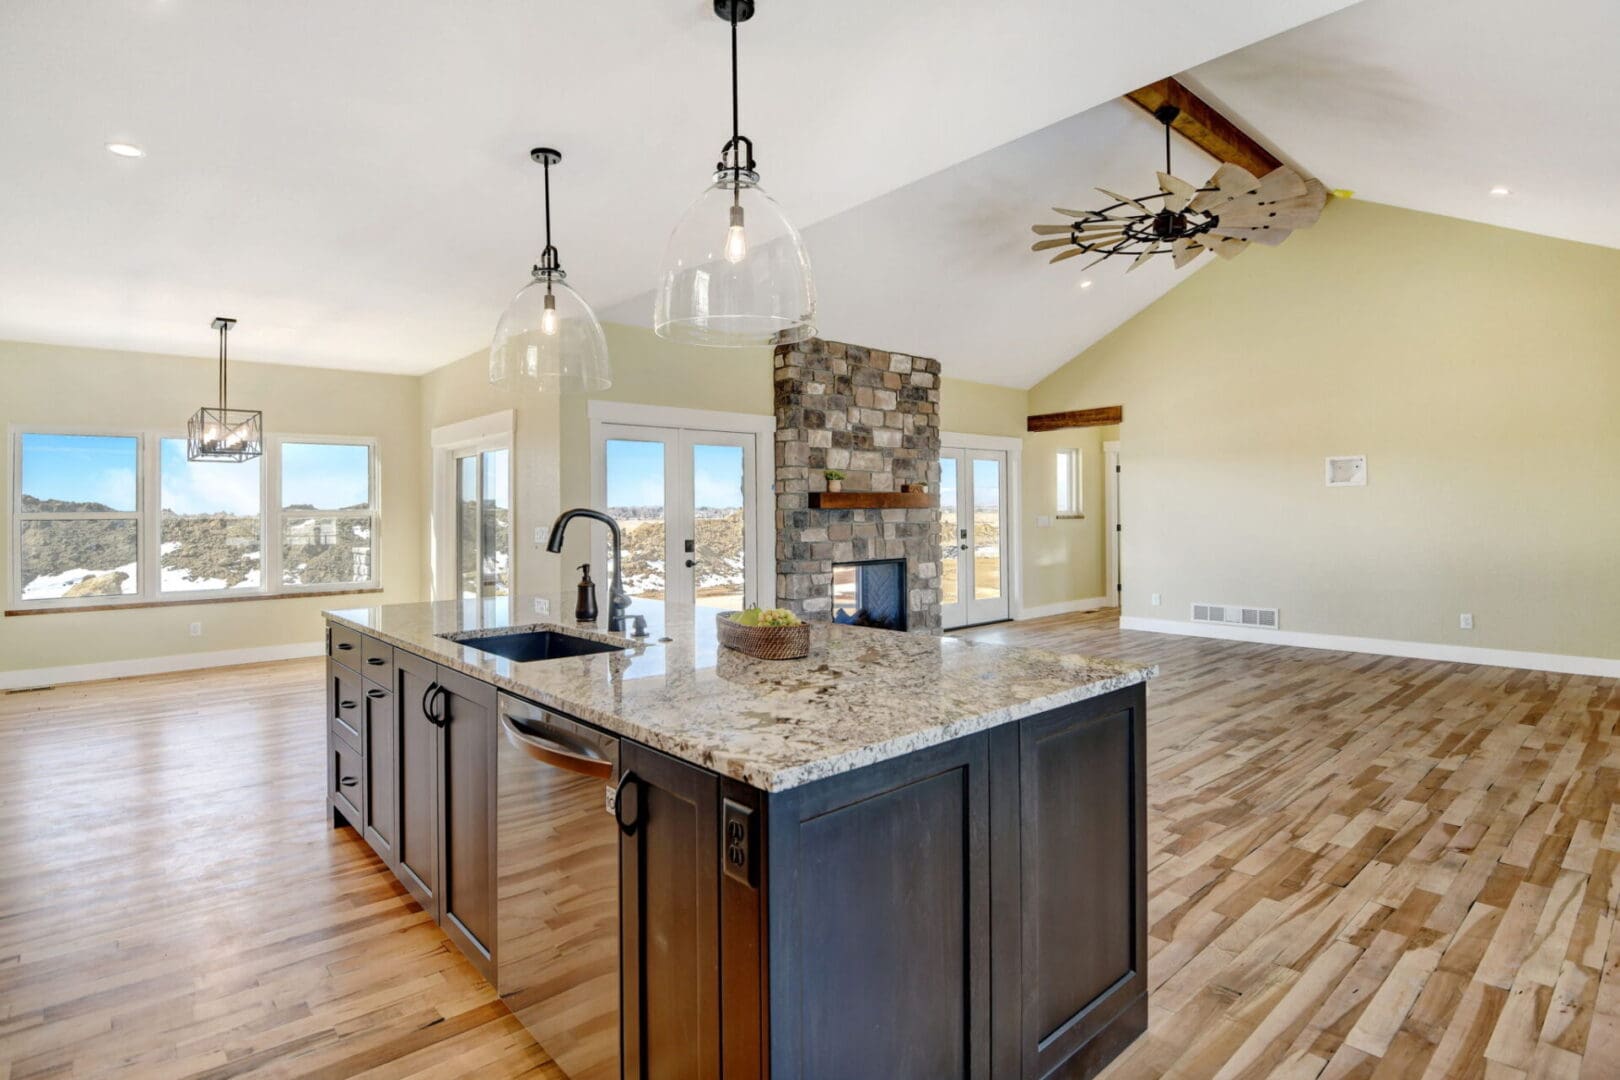 Kitchen island with sink and ceiling lights